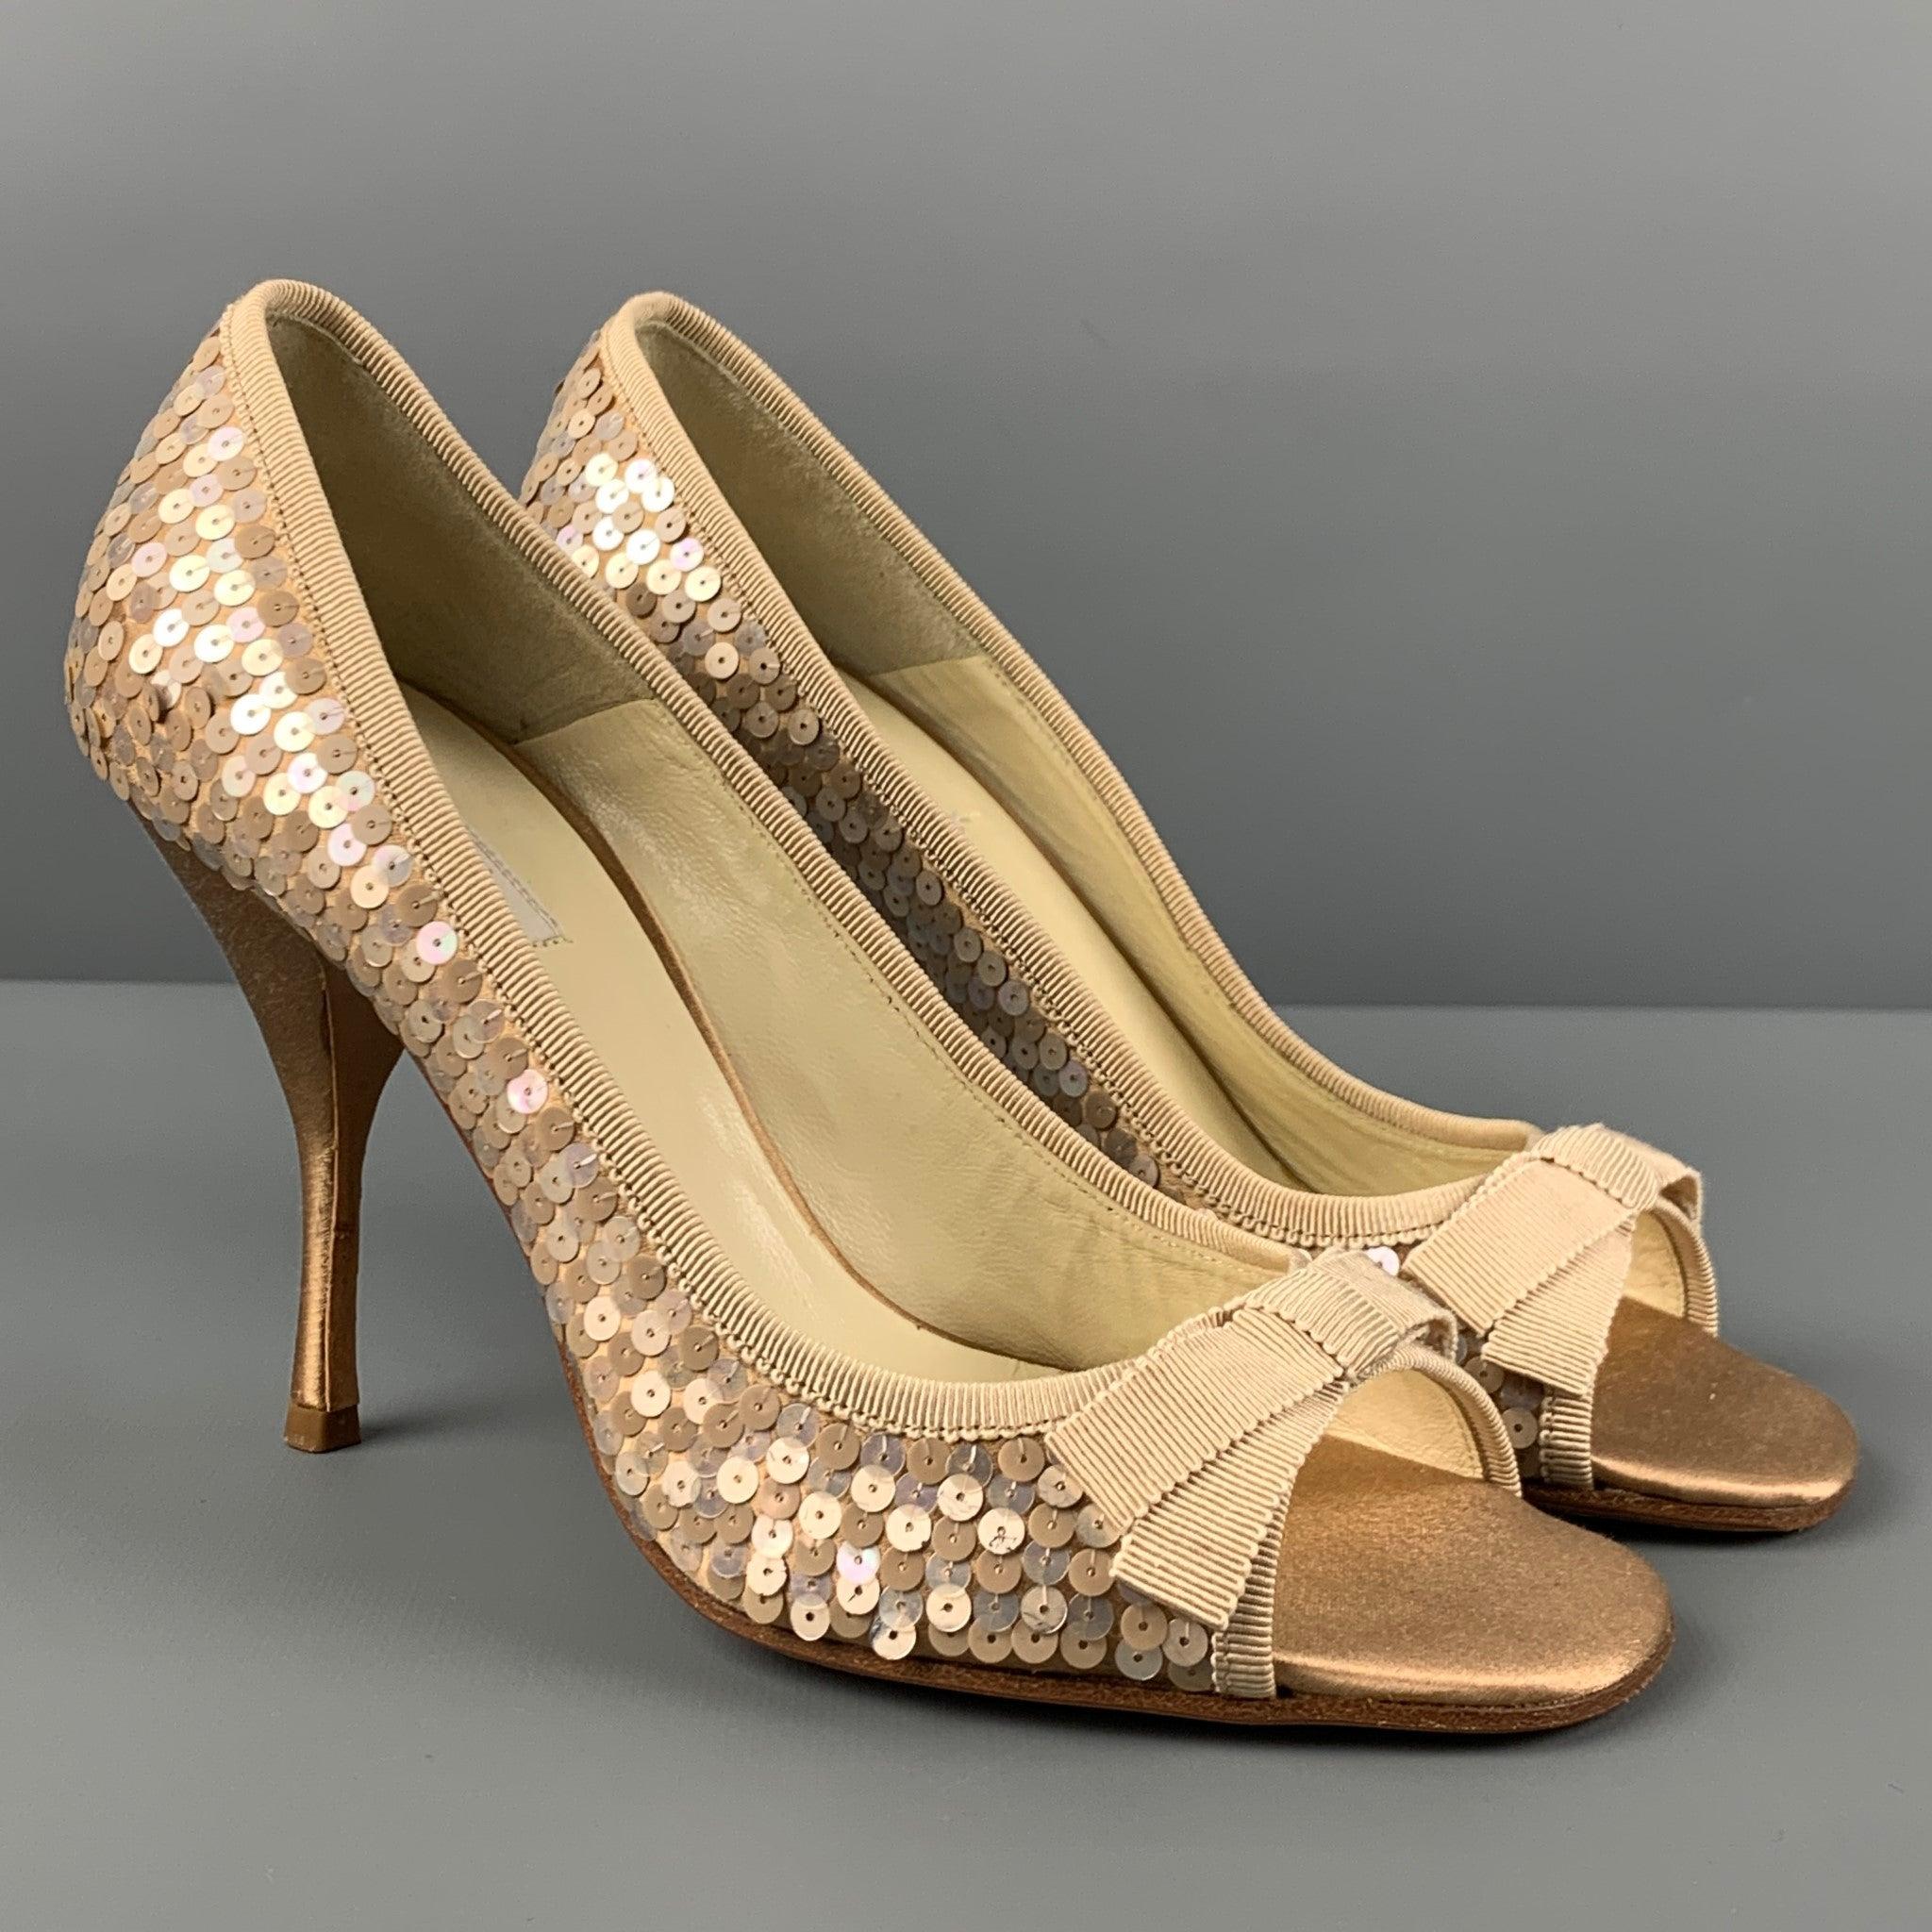 PRADA pumps comes in a taupe sequin silk featuring a front bow detail, open toe, and a stiletto heel. Made in Italy.
Very Good
Pre-Owned Condition. 

Marked:   36.5 

Measurements: 
  Heel: 3.75 inches 
  
  
 
Reference: 119046
Category: Pumps
More